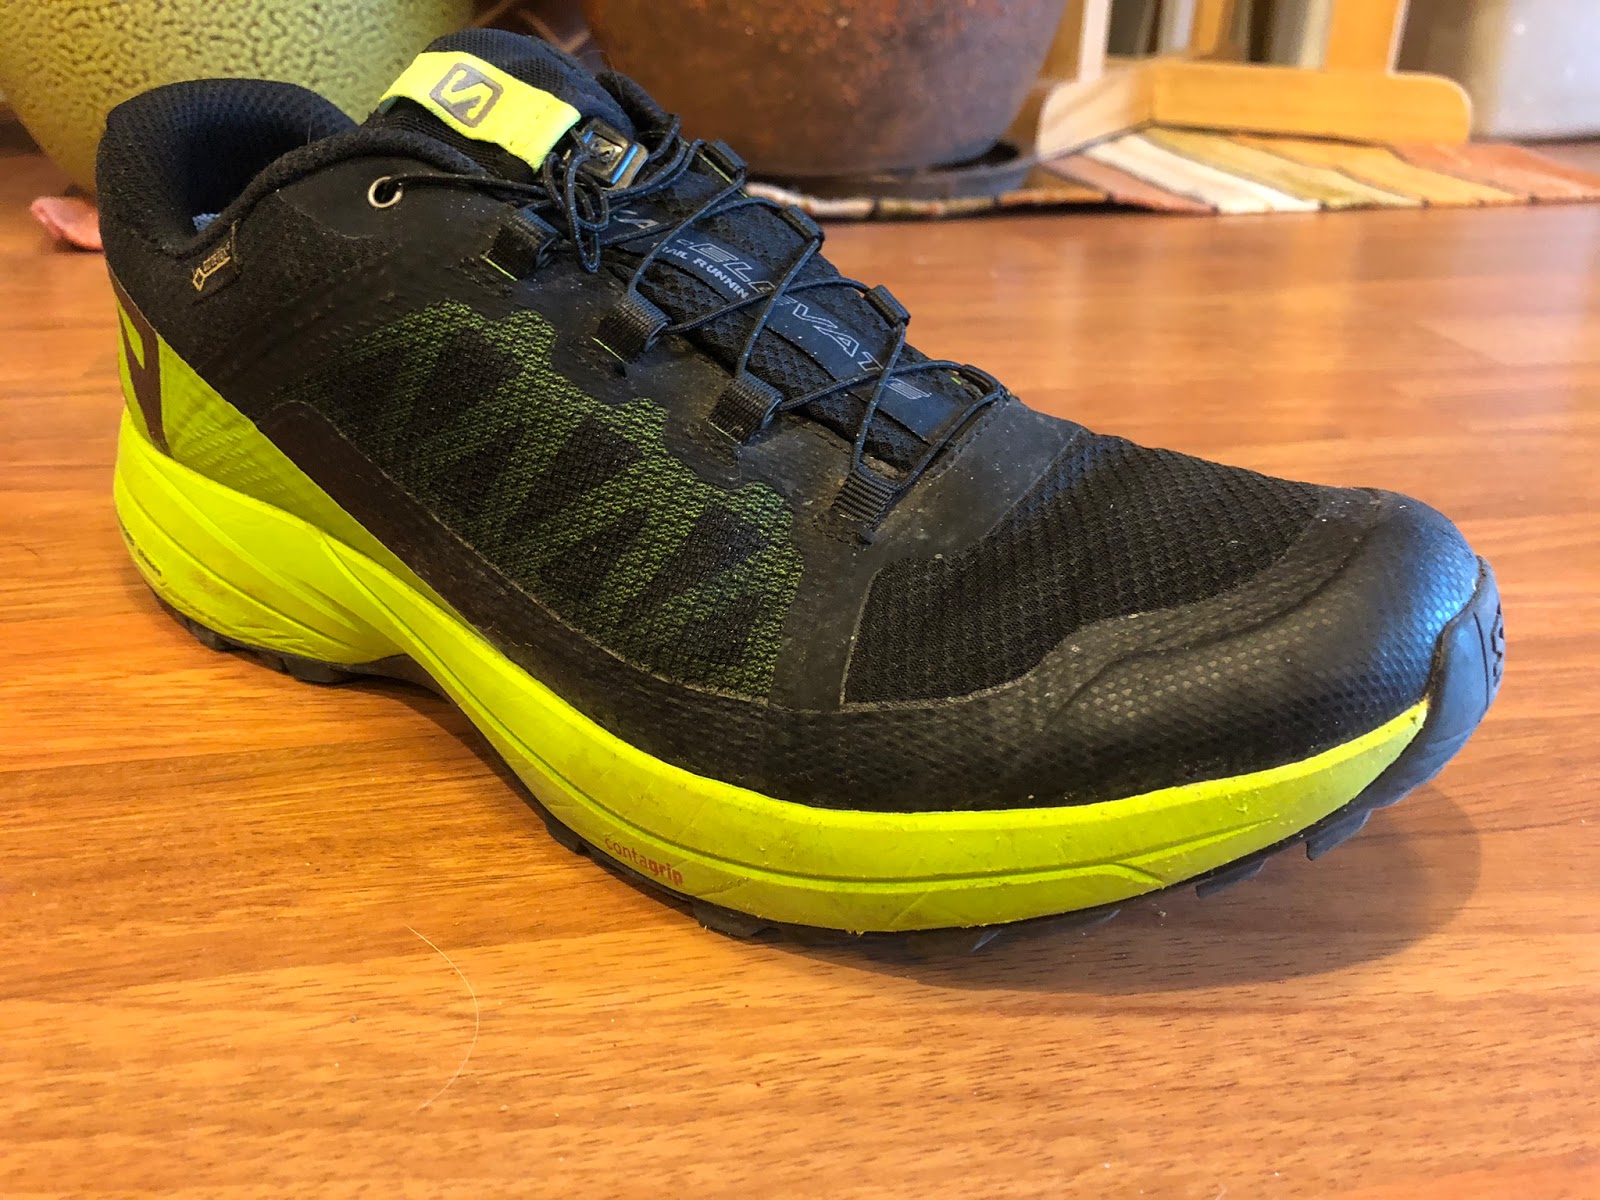 Trail Run: XA Elevate GTX Review - All of the Rugged, Versatile Greatness of the XA Elevate with Added Protection